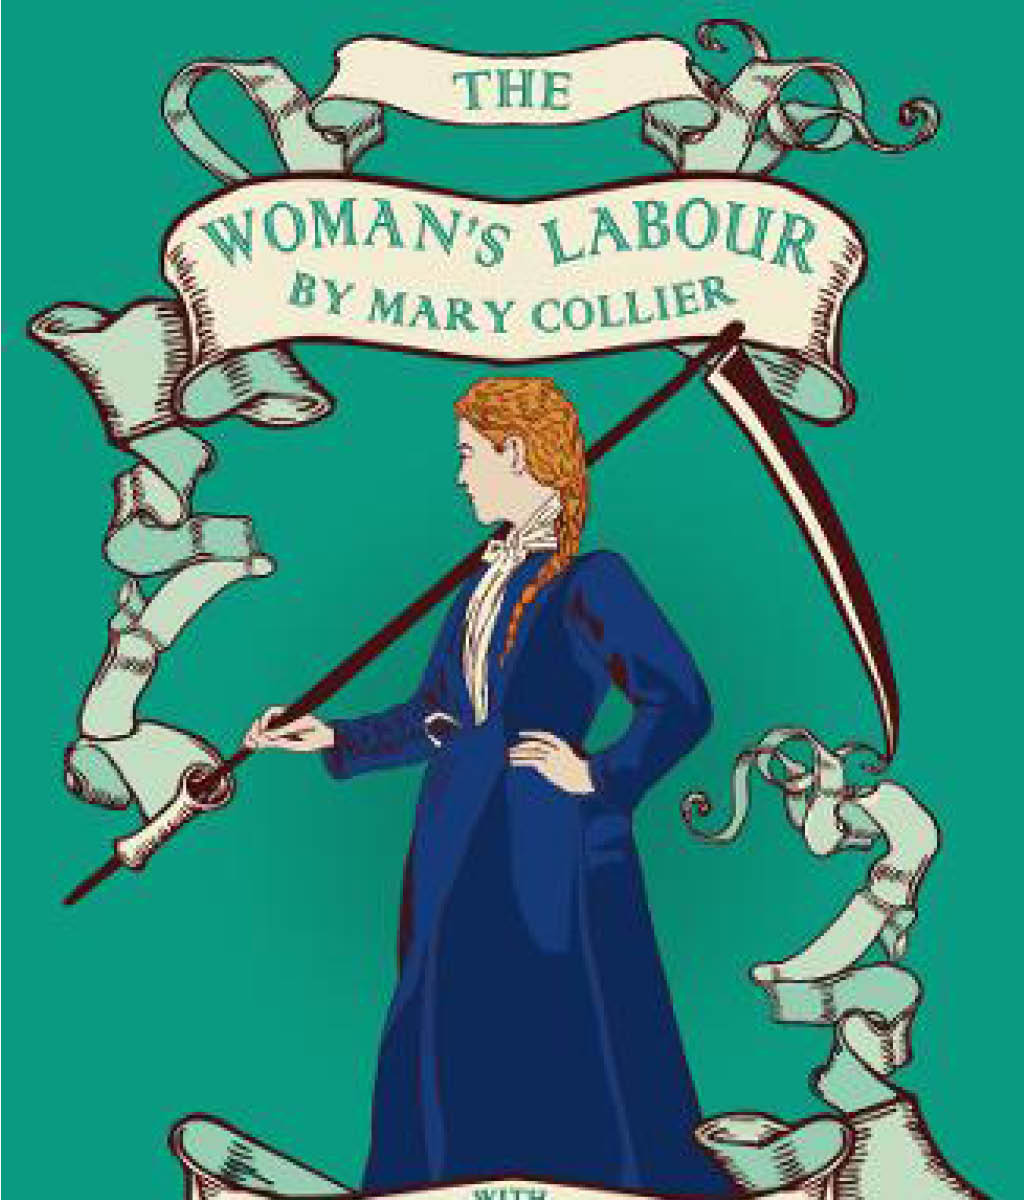 The Woman’s Labour by Mary Collier